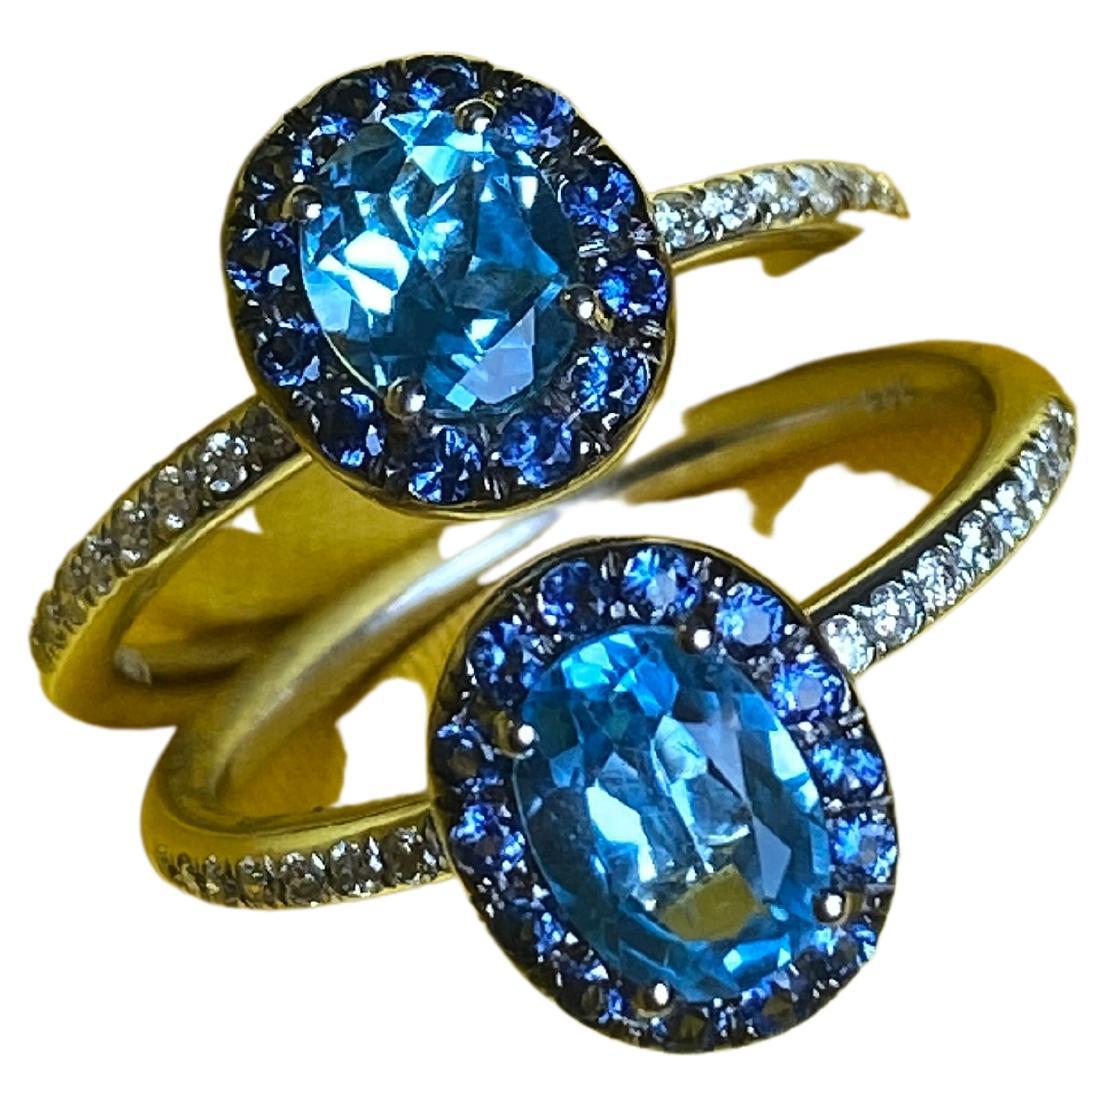 Swiss Topaz & Diamond Solitaire Ring with Sapphire Halo, Gemstone Solitaire Ring